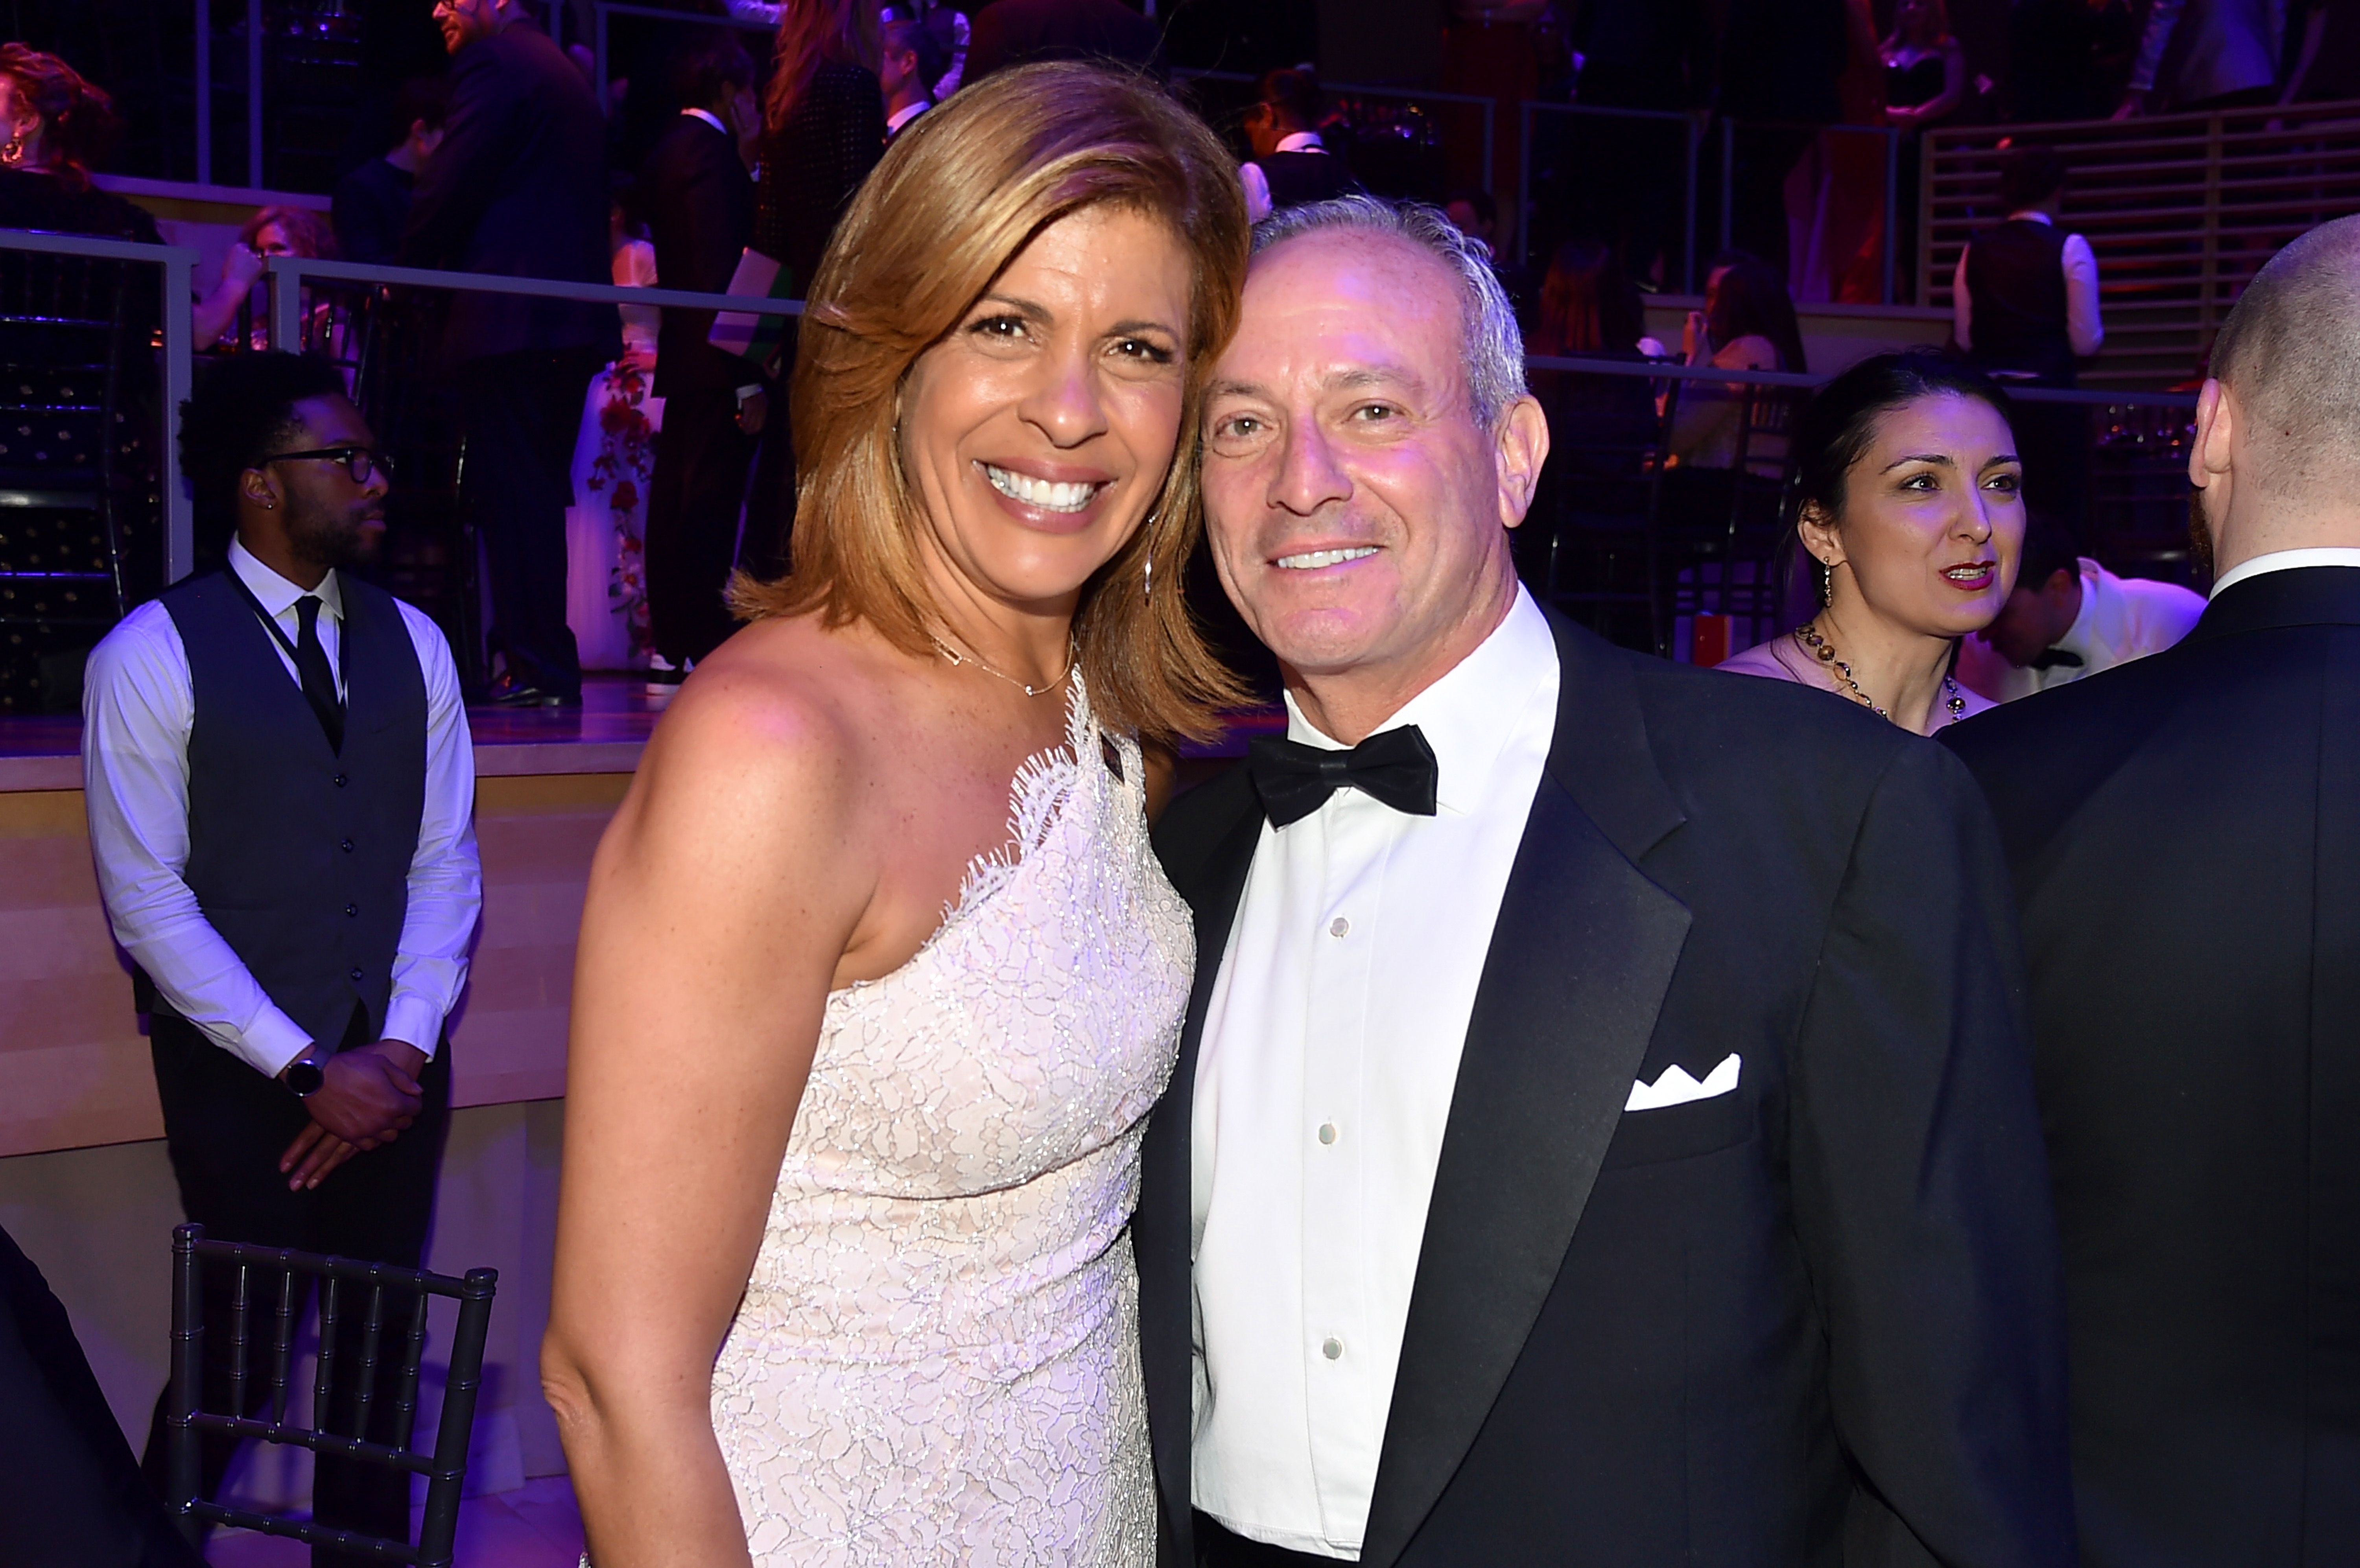 Hoda Kotb and Joel Schiffman at the 2018 TIME 100 Gala at Jazz at Lincoln Center in New York City | Photo: Getty Images